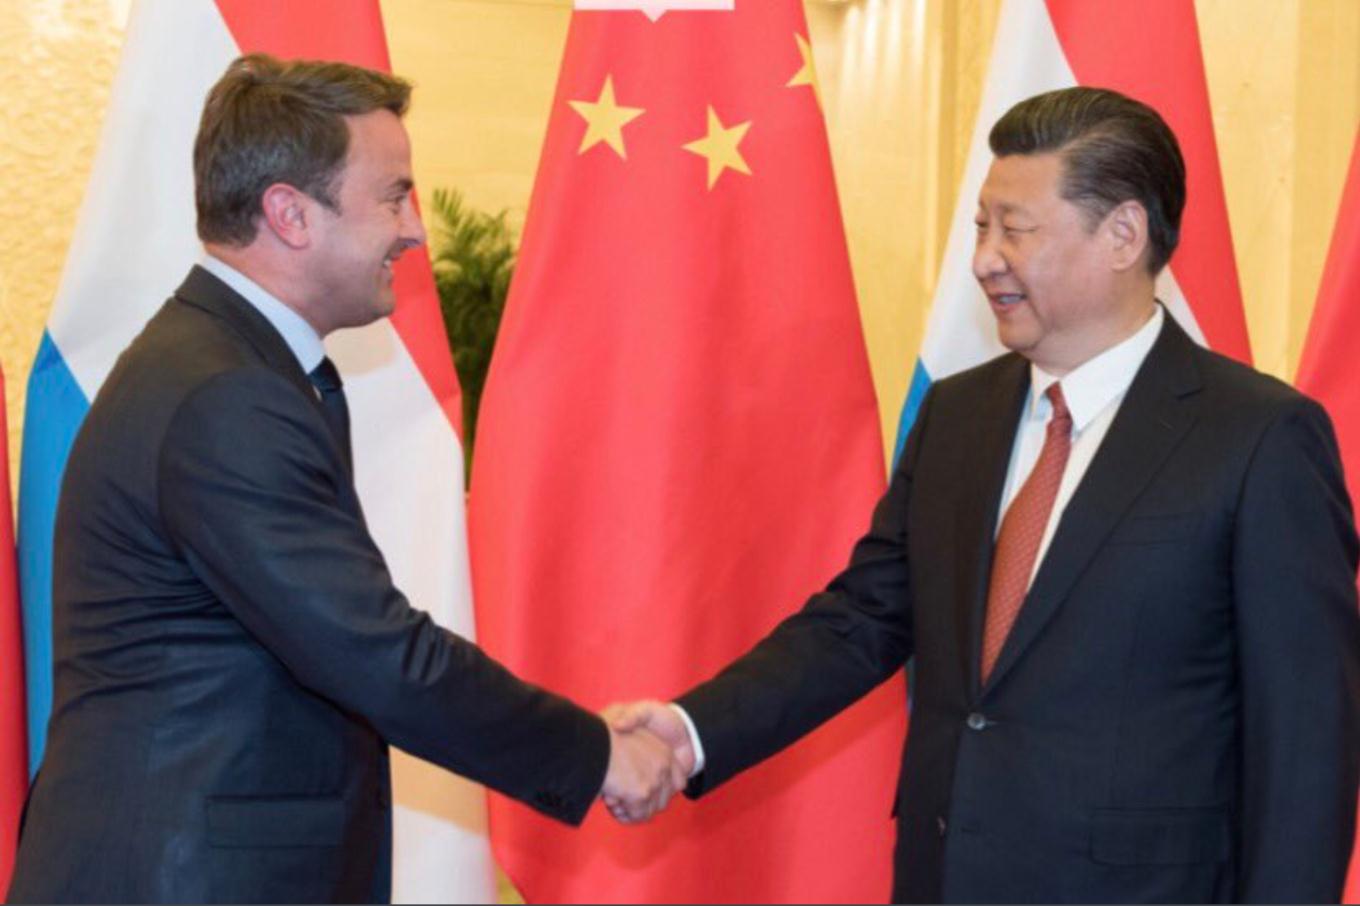 Self Photos / Files - Luxembourg PM and Xi